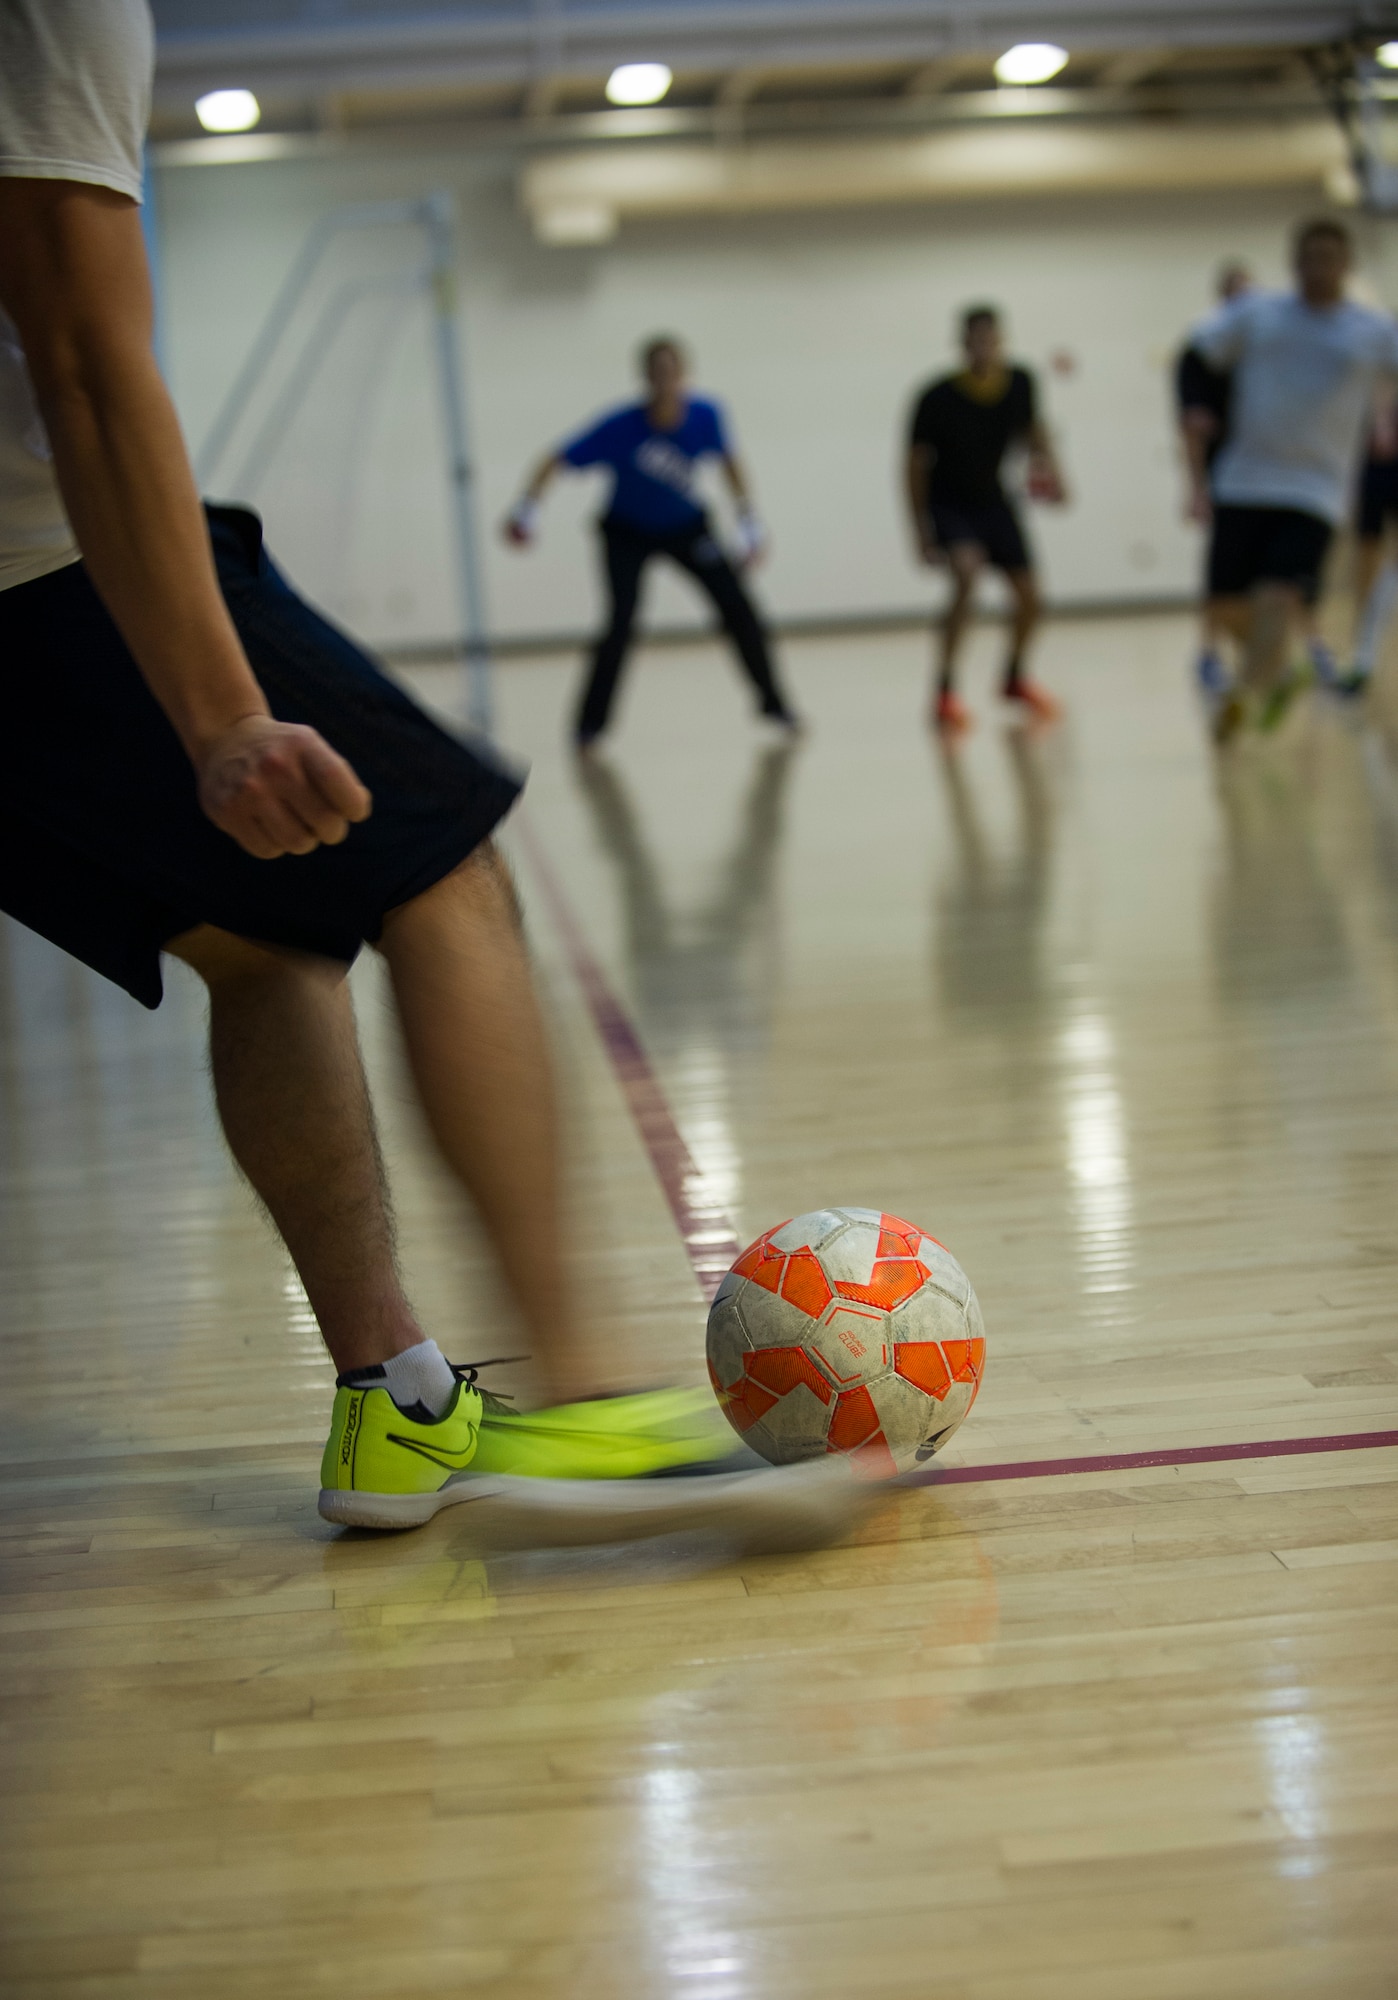 An Airman from the 5th Medical Group takes a corner kick during the intramural indoor soccer championship at Minot Air Force Base, N.D., Nov. 24, 2015. The game between the 5th MDG and 5th Contracting Squadron resulted in a win for 5th CONS. (U.S. Air Force photo/Senior Airman Apryl Hall)